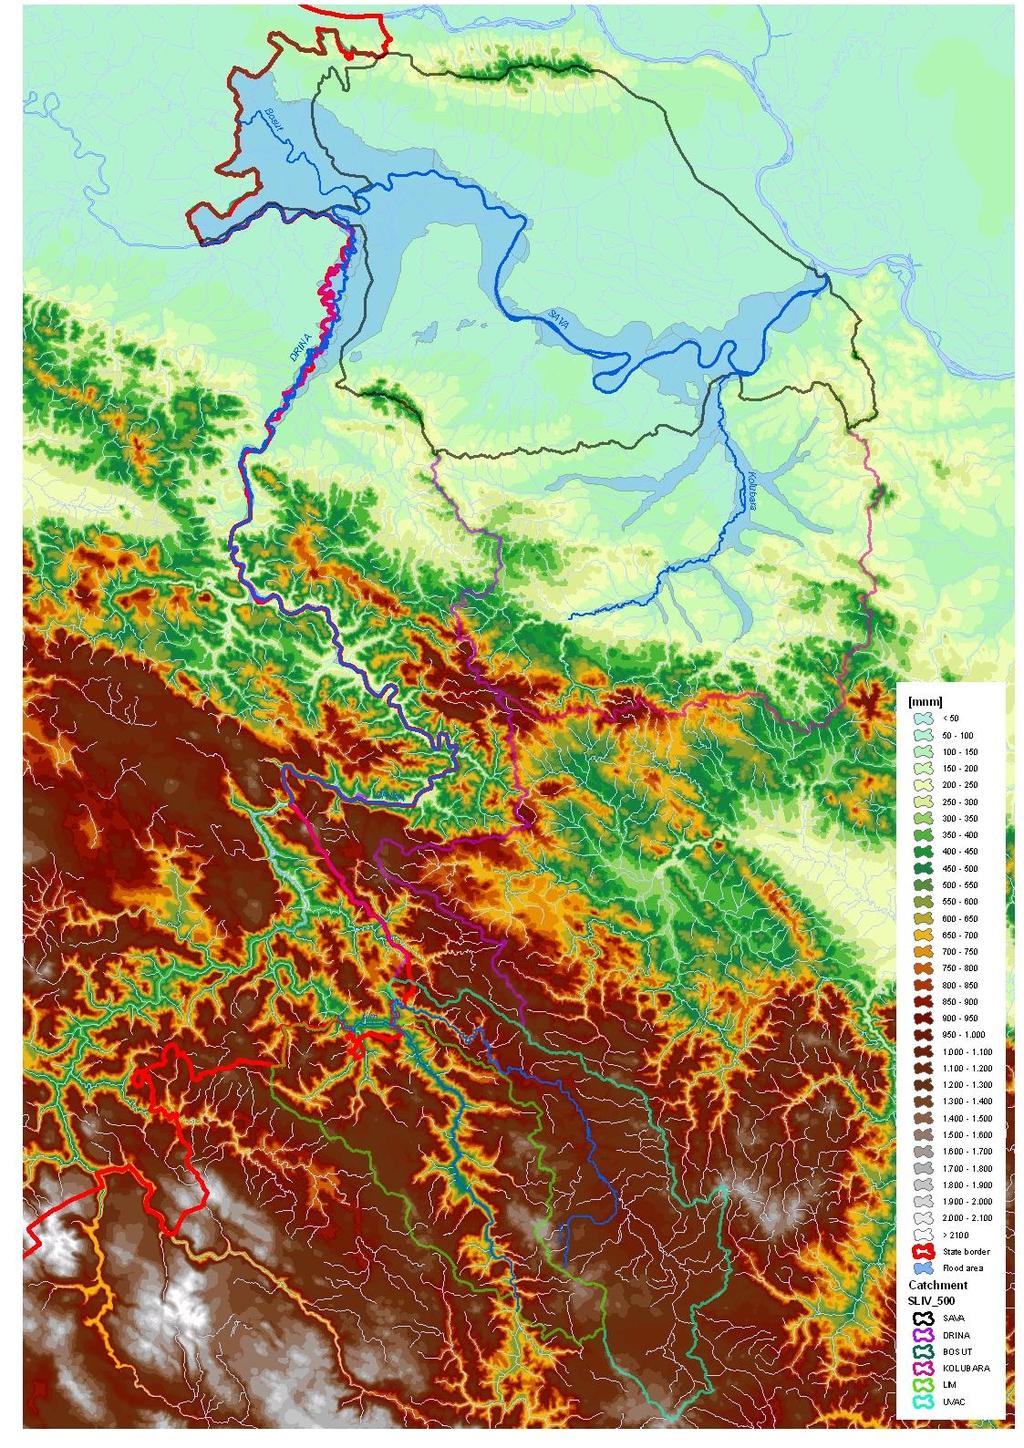 Figure Ap3-2: Topography of the Sava River Basin in